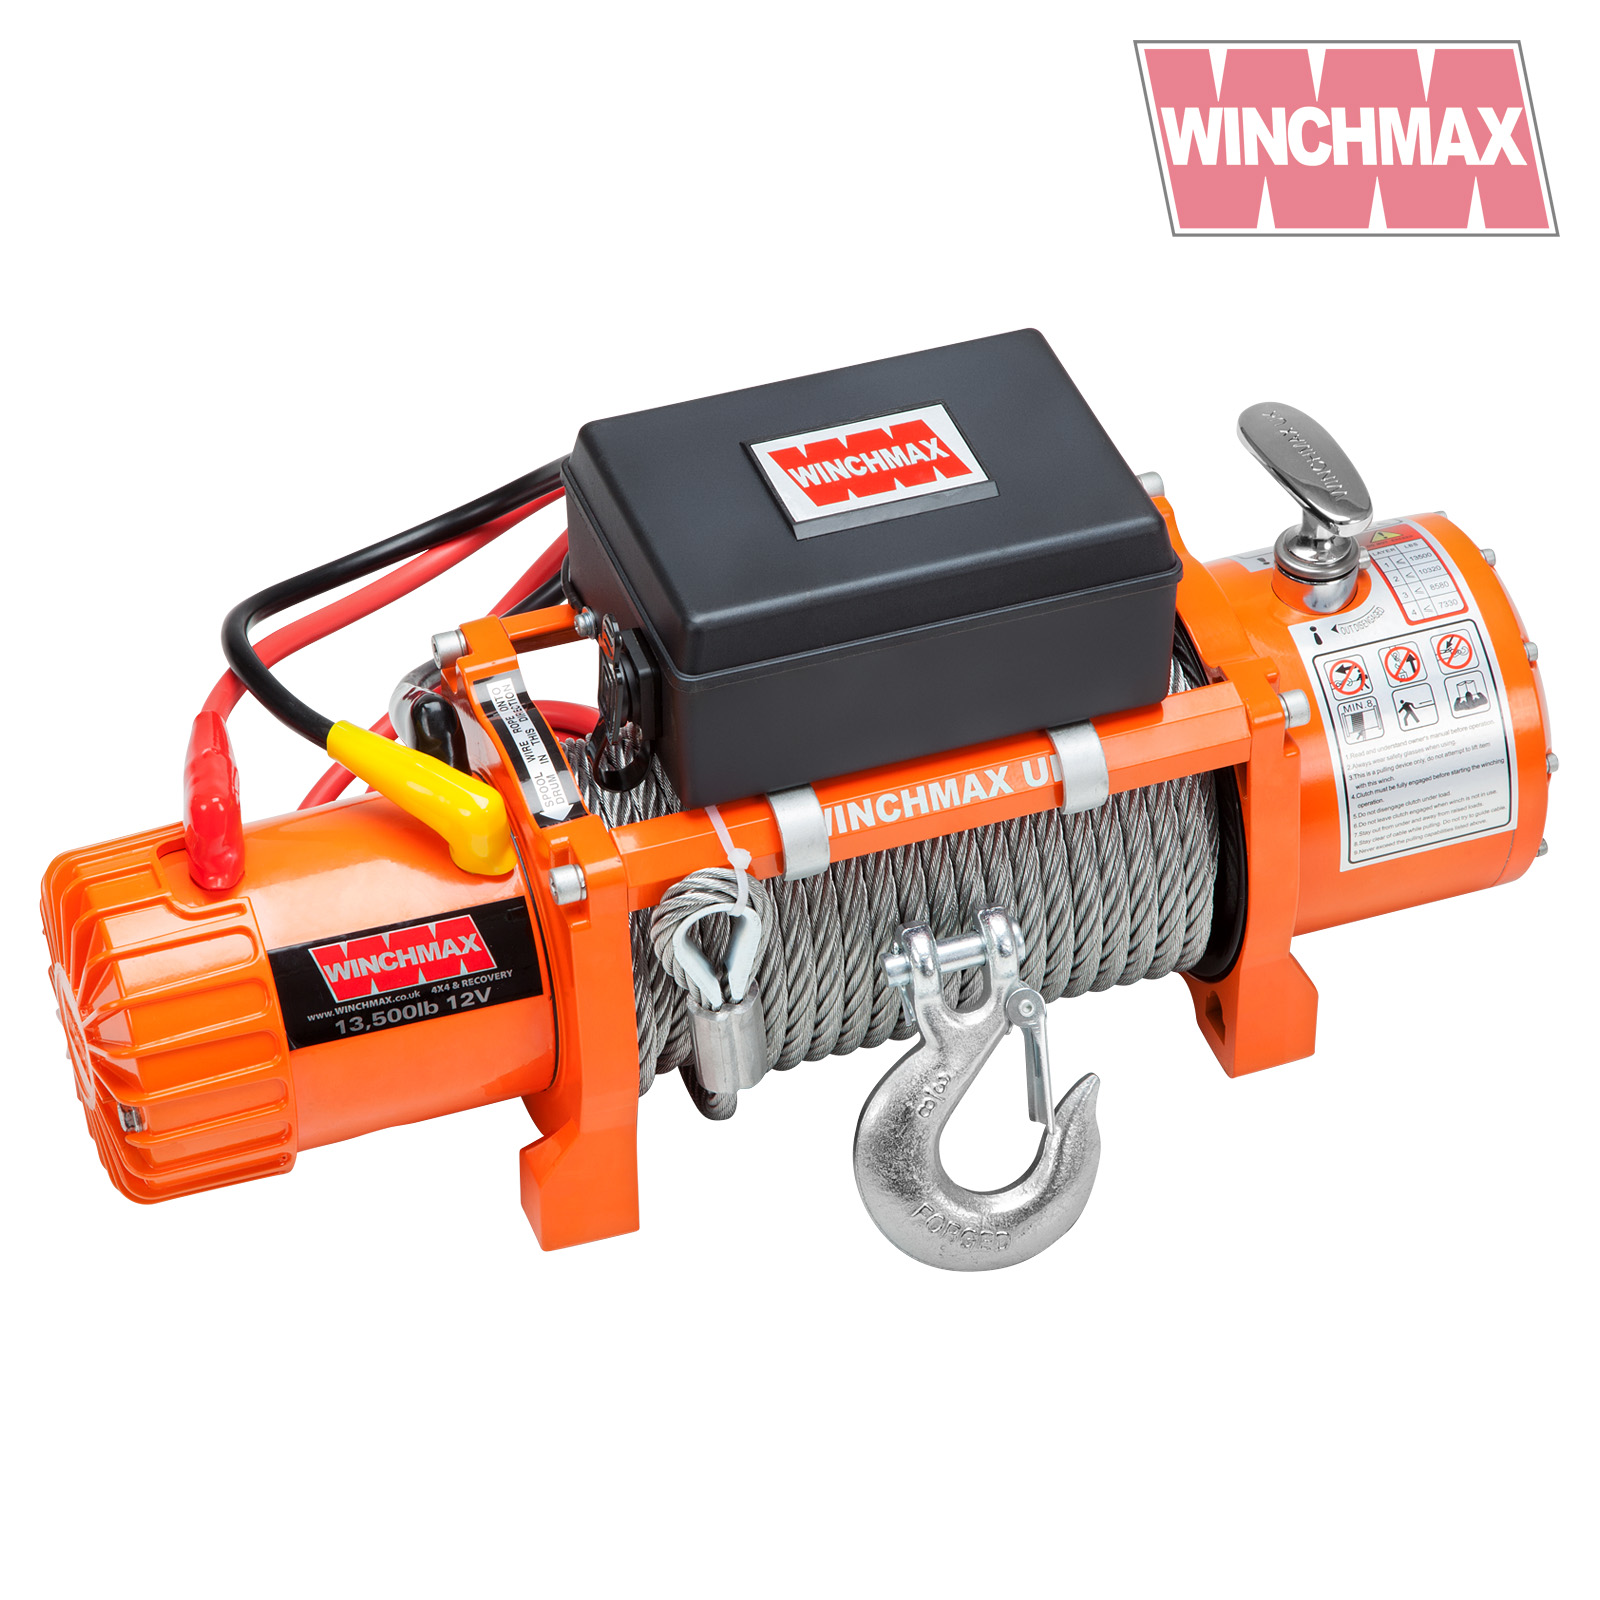 MOUNTING PLATE INC. ELECTRIC WINCH 12V 4x4/RECOVERY 13500 lb WINCHMAX BRAND